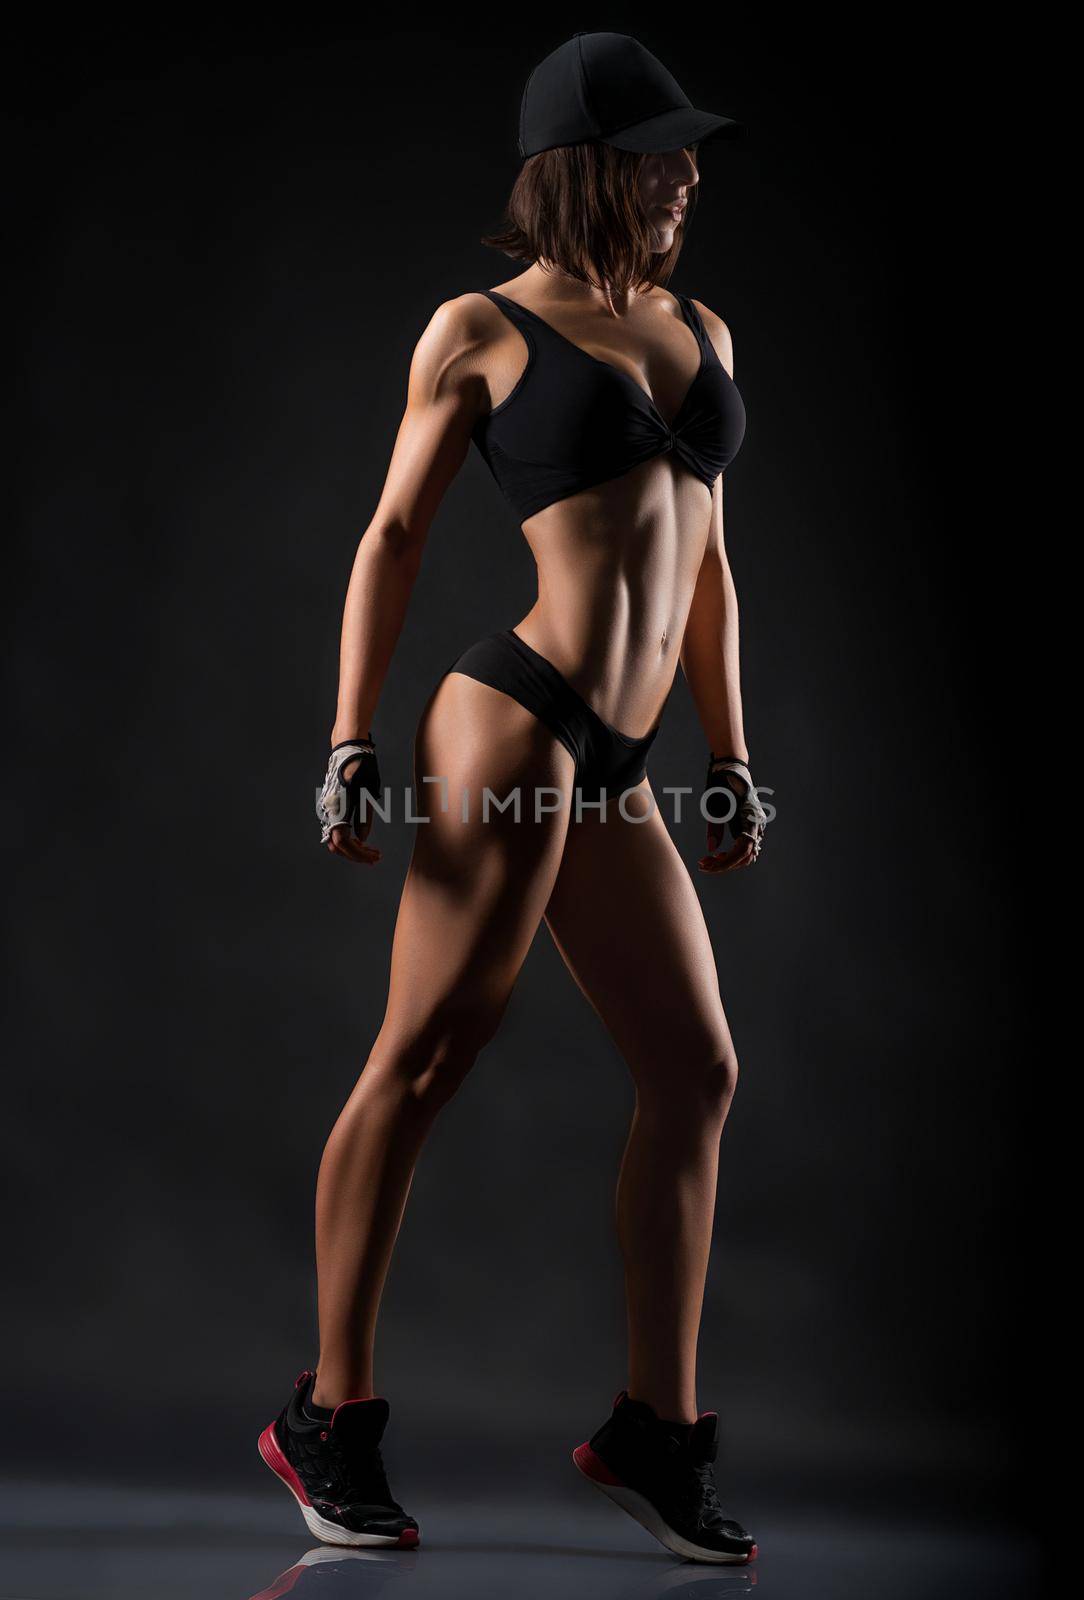 She is motivation. Full length studio shot of a fitness woman wearing workout clothing posing showing off her perfect strong body